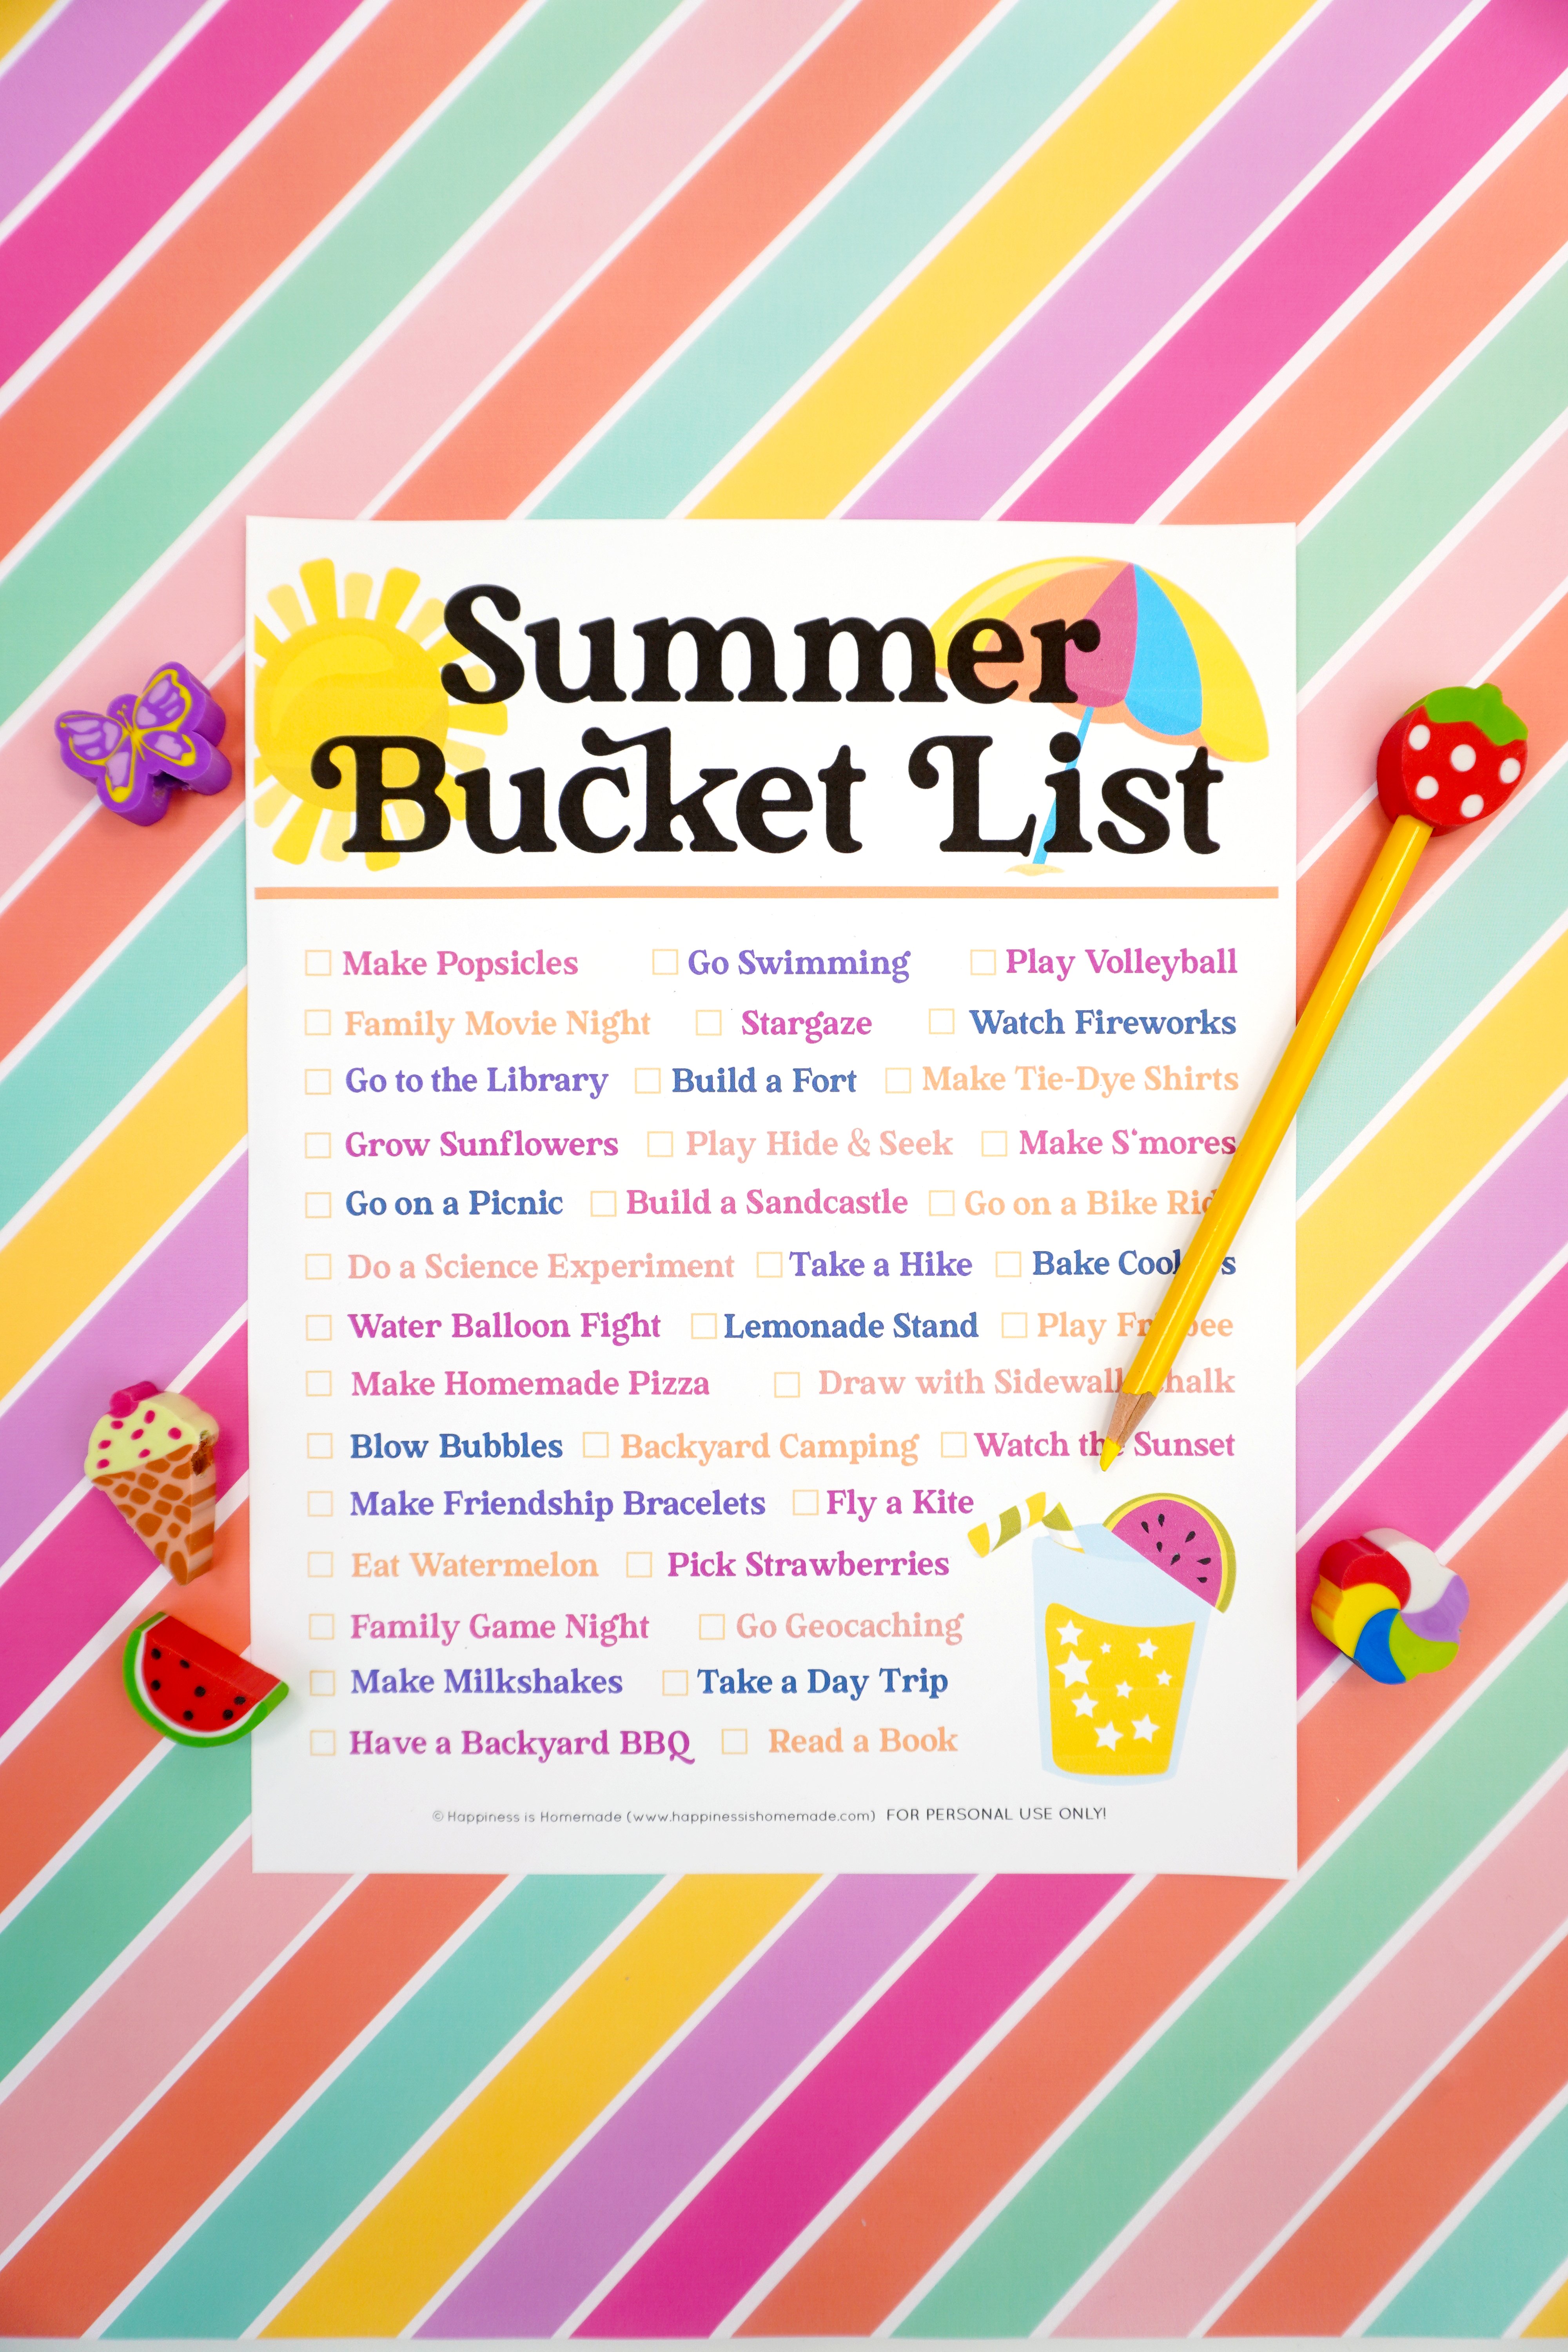 Summer Bucket List printable on a colorful striped background with yellow pencil and summer novelty erasers